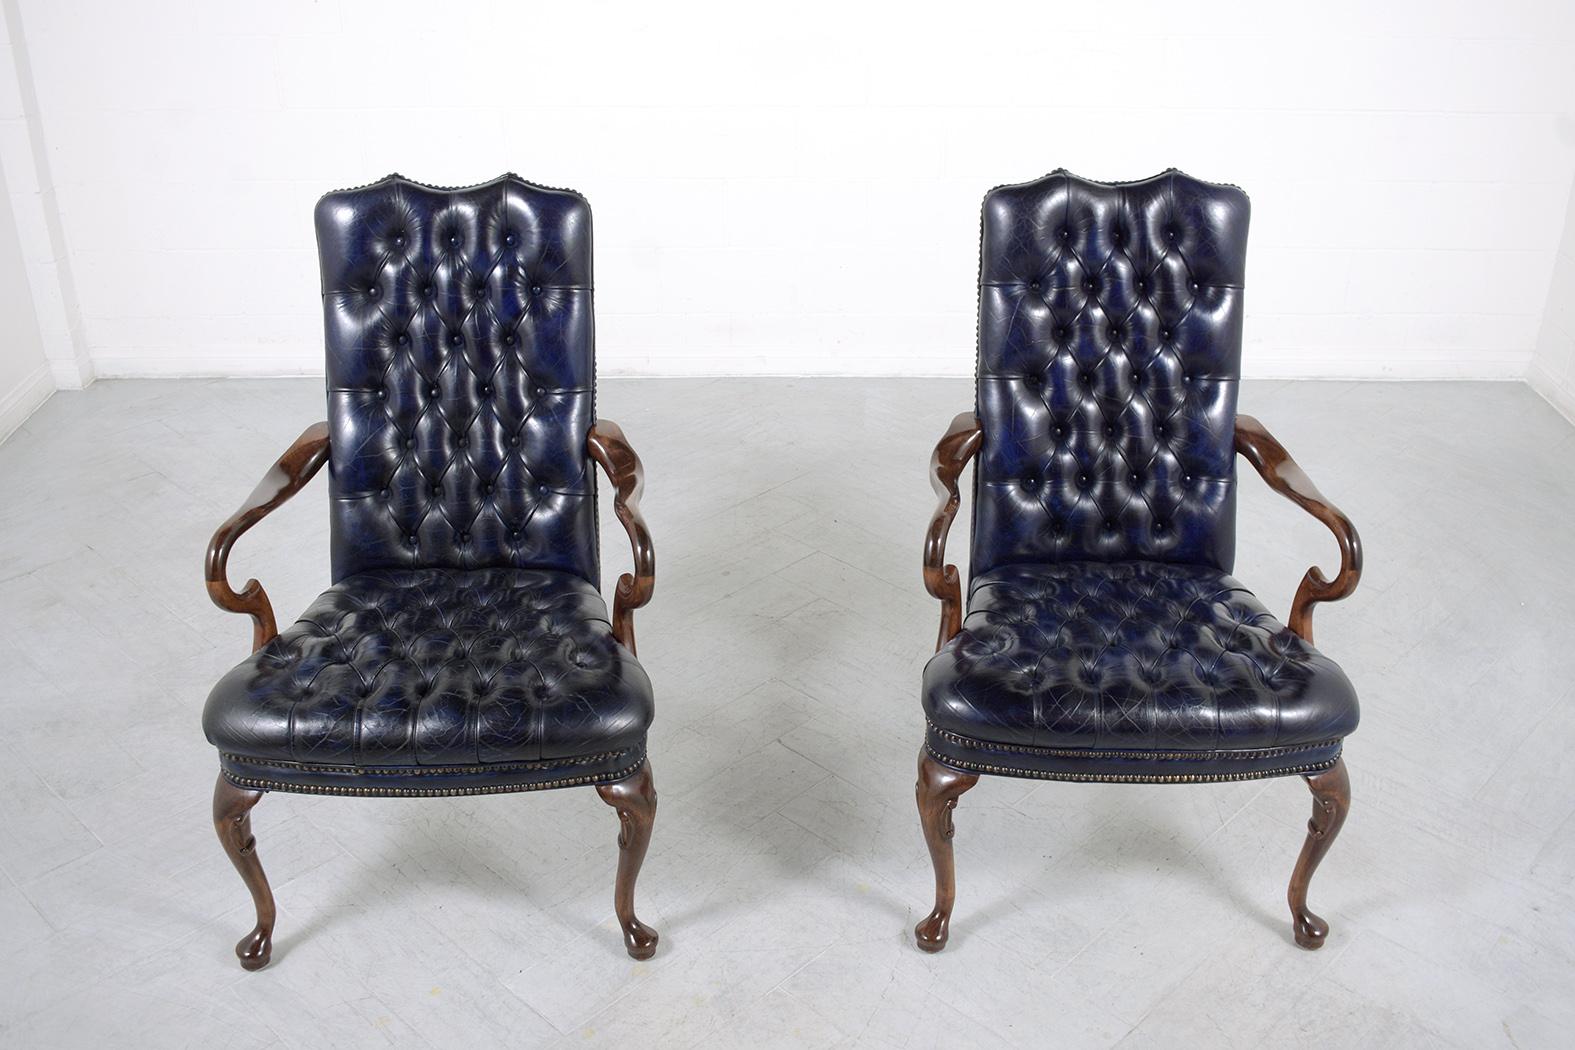 Carved Chesterfield Tufted Leather Chairs